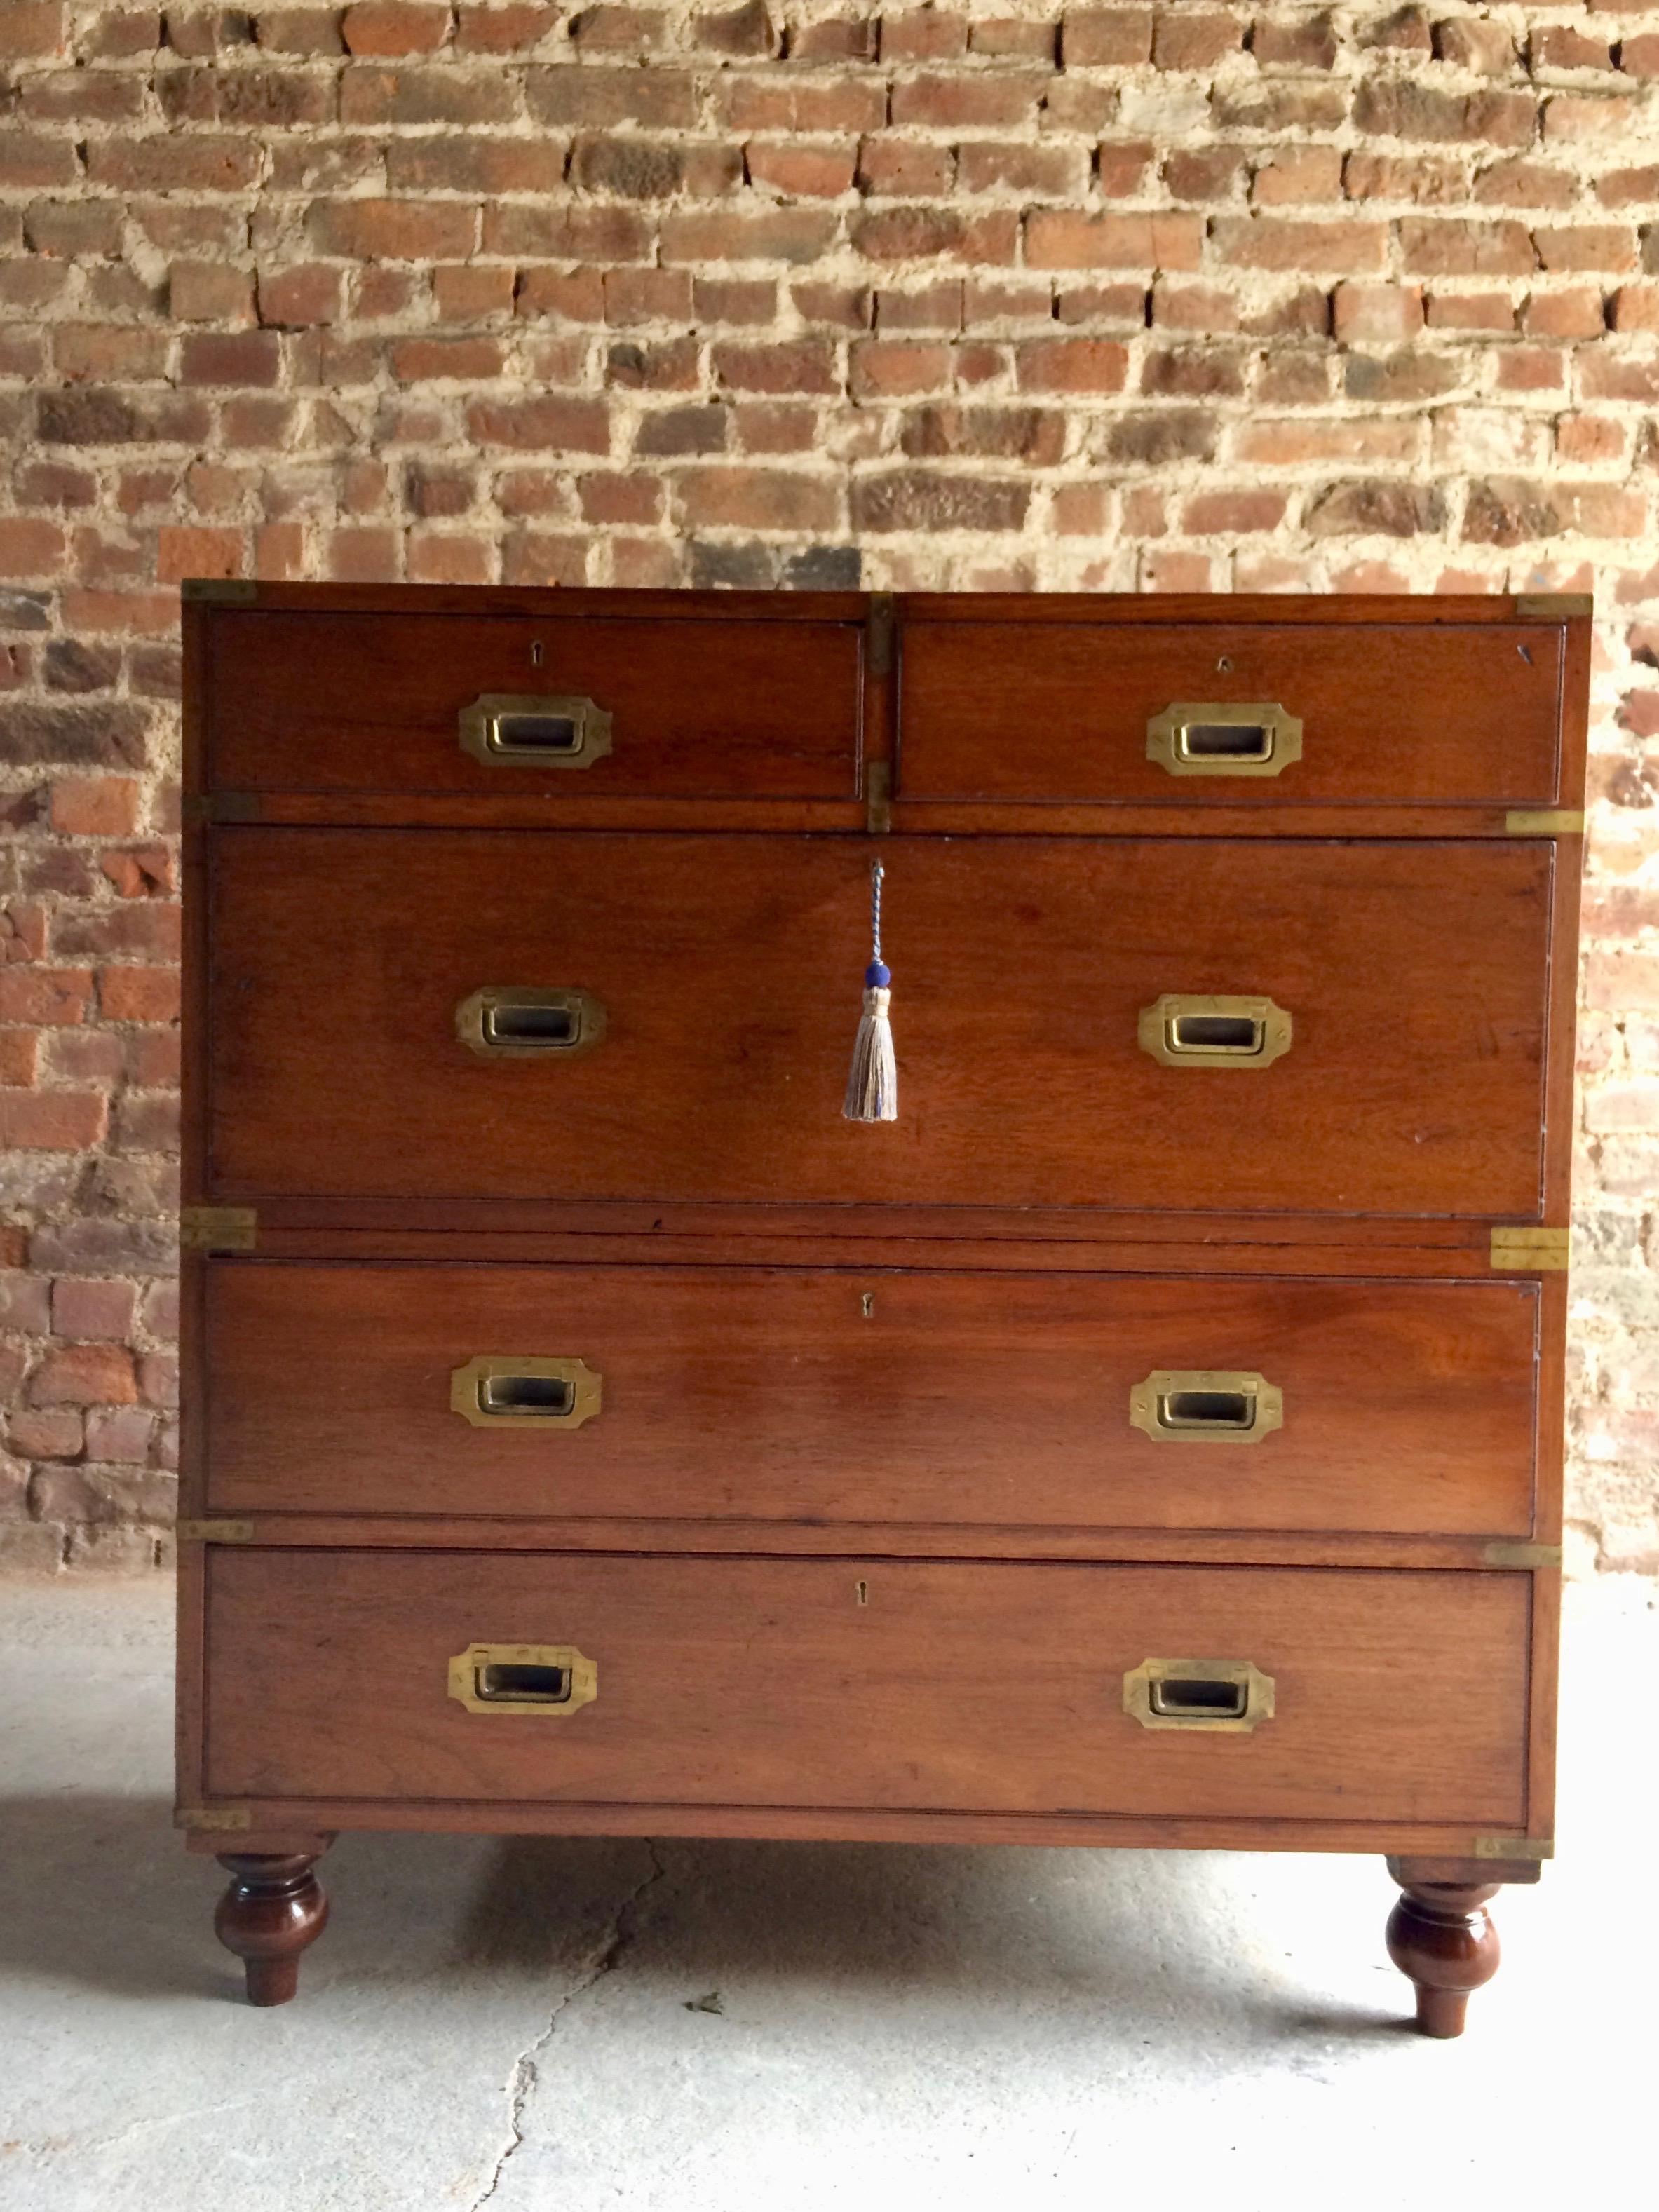 Fabulous Antique Campaign Chest of Drawers Mahogany circa 1875 Victorian No.5 6